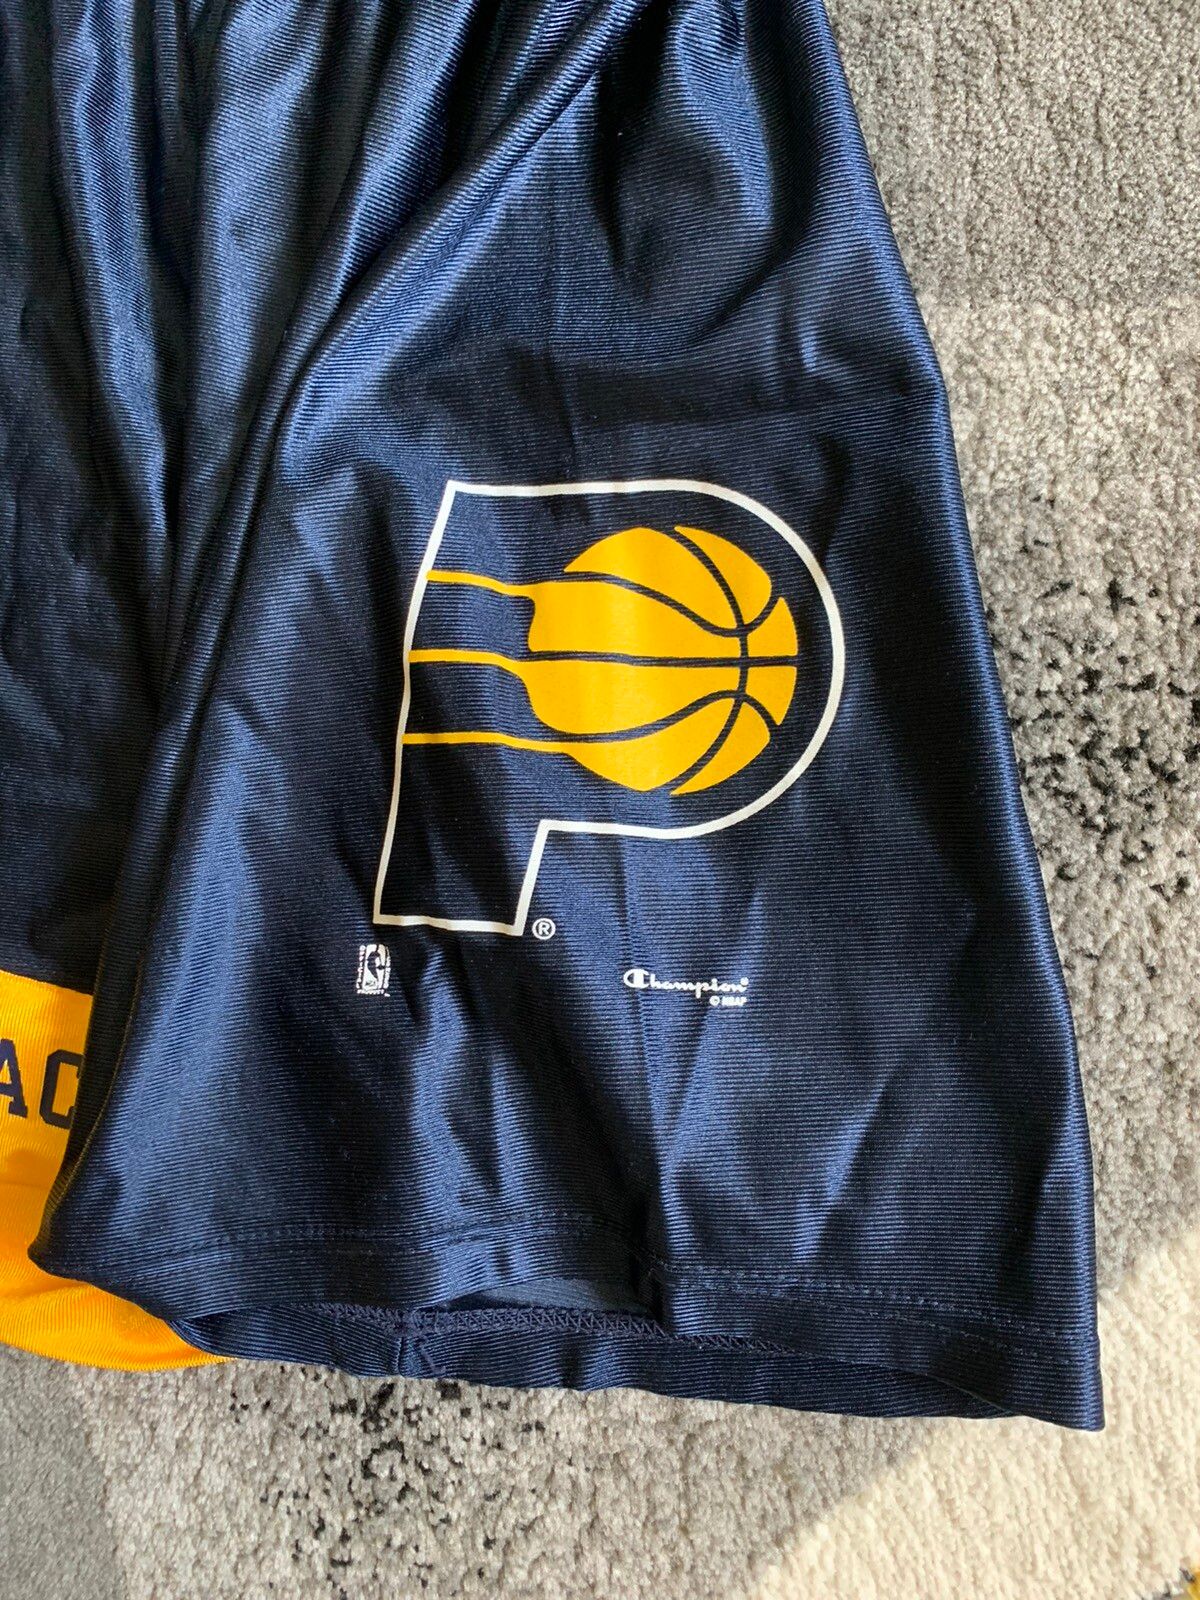 Vintage Indiana Pacer 90s Basketball Shorts Size US 30 / EU 46 - 2 Preview